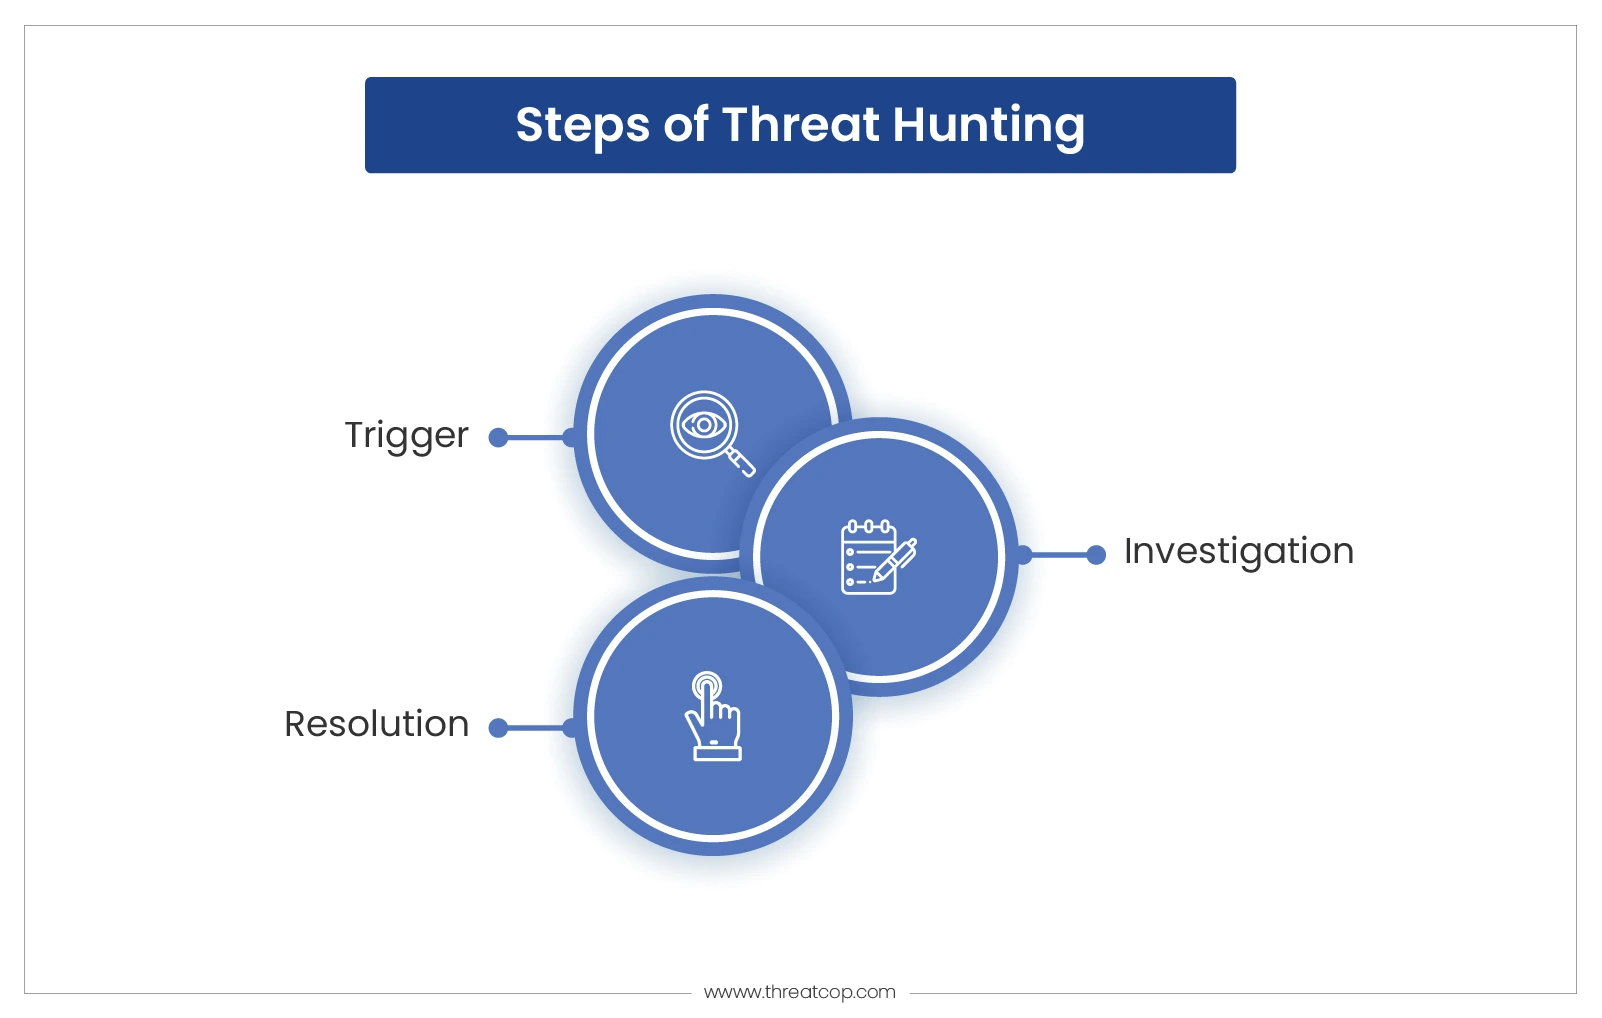 Steps of Threat Hunting